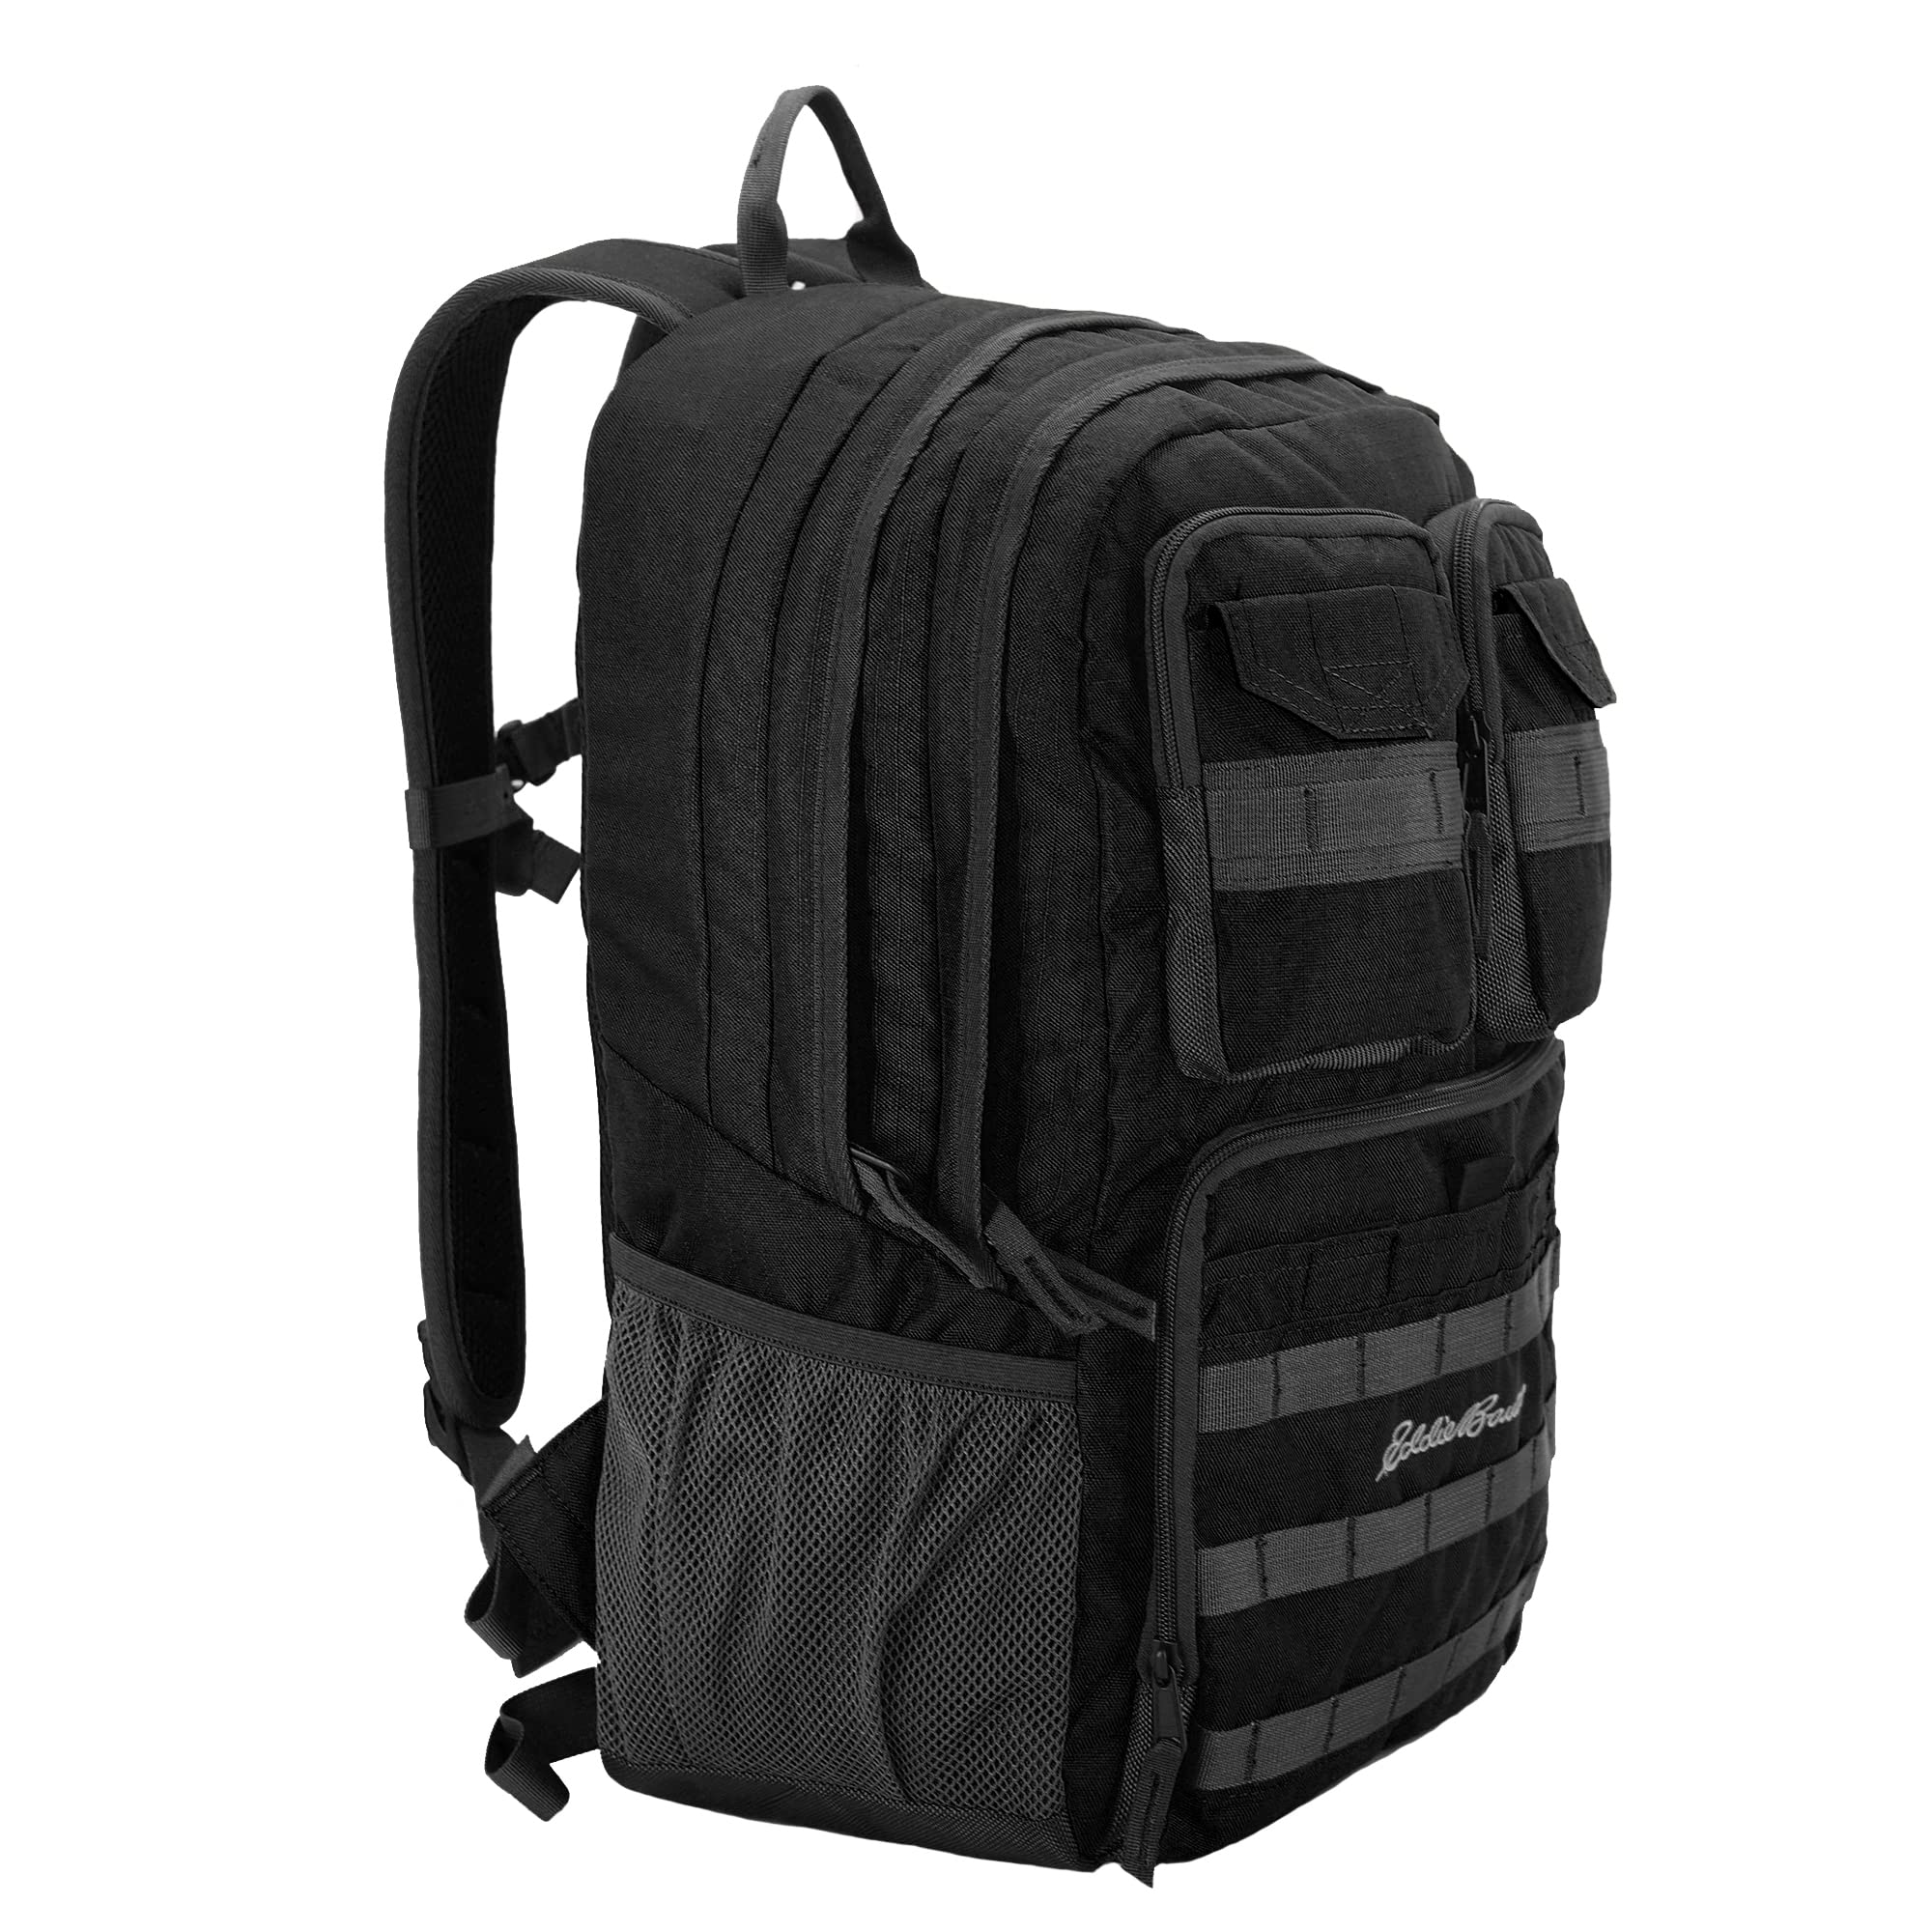 Eddie Bauer Cargo Backpack 30L Access Computer Sleeve and Dual Mesh Side Pockets, Black